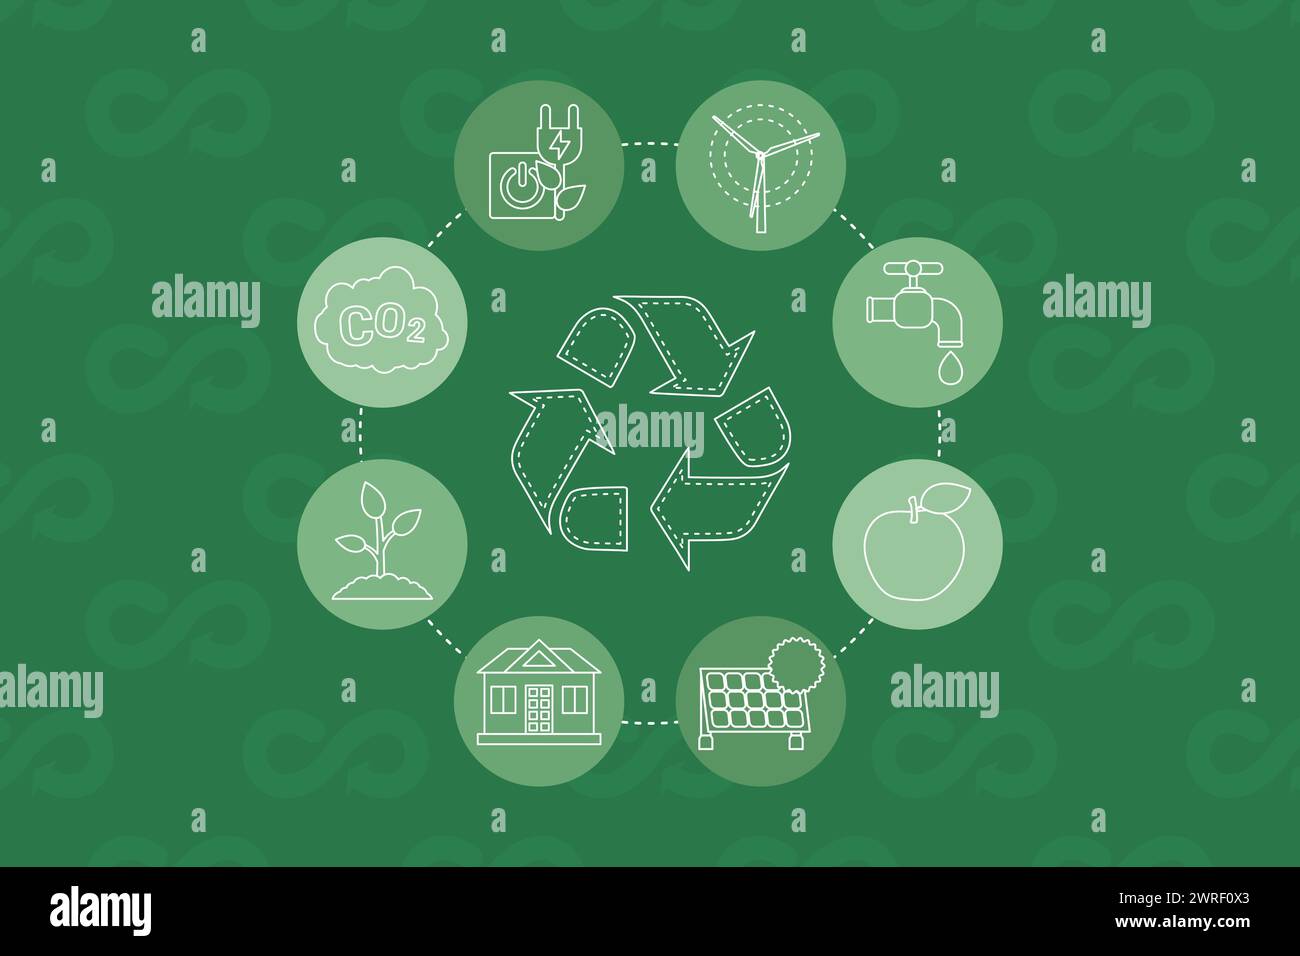 Circular economy concept. Scheme of icons representing ecofriendly practices like carbon neutral, zero waste, green energy and recycling. Ecological i Stock Vector